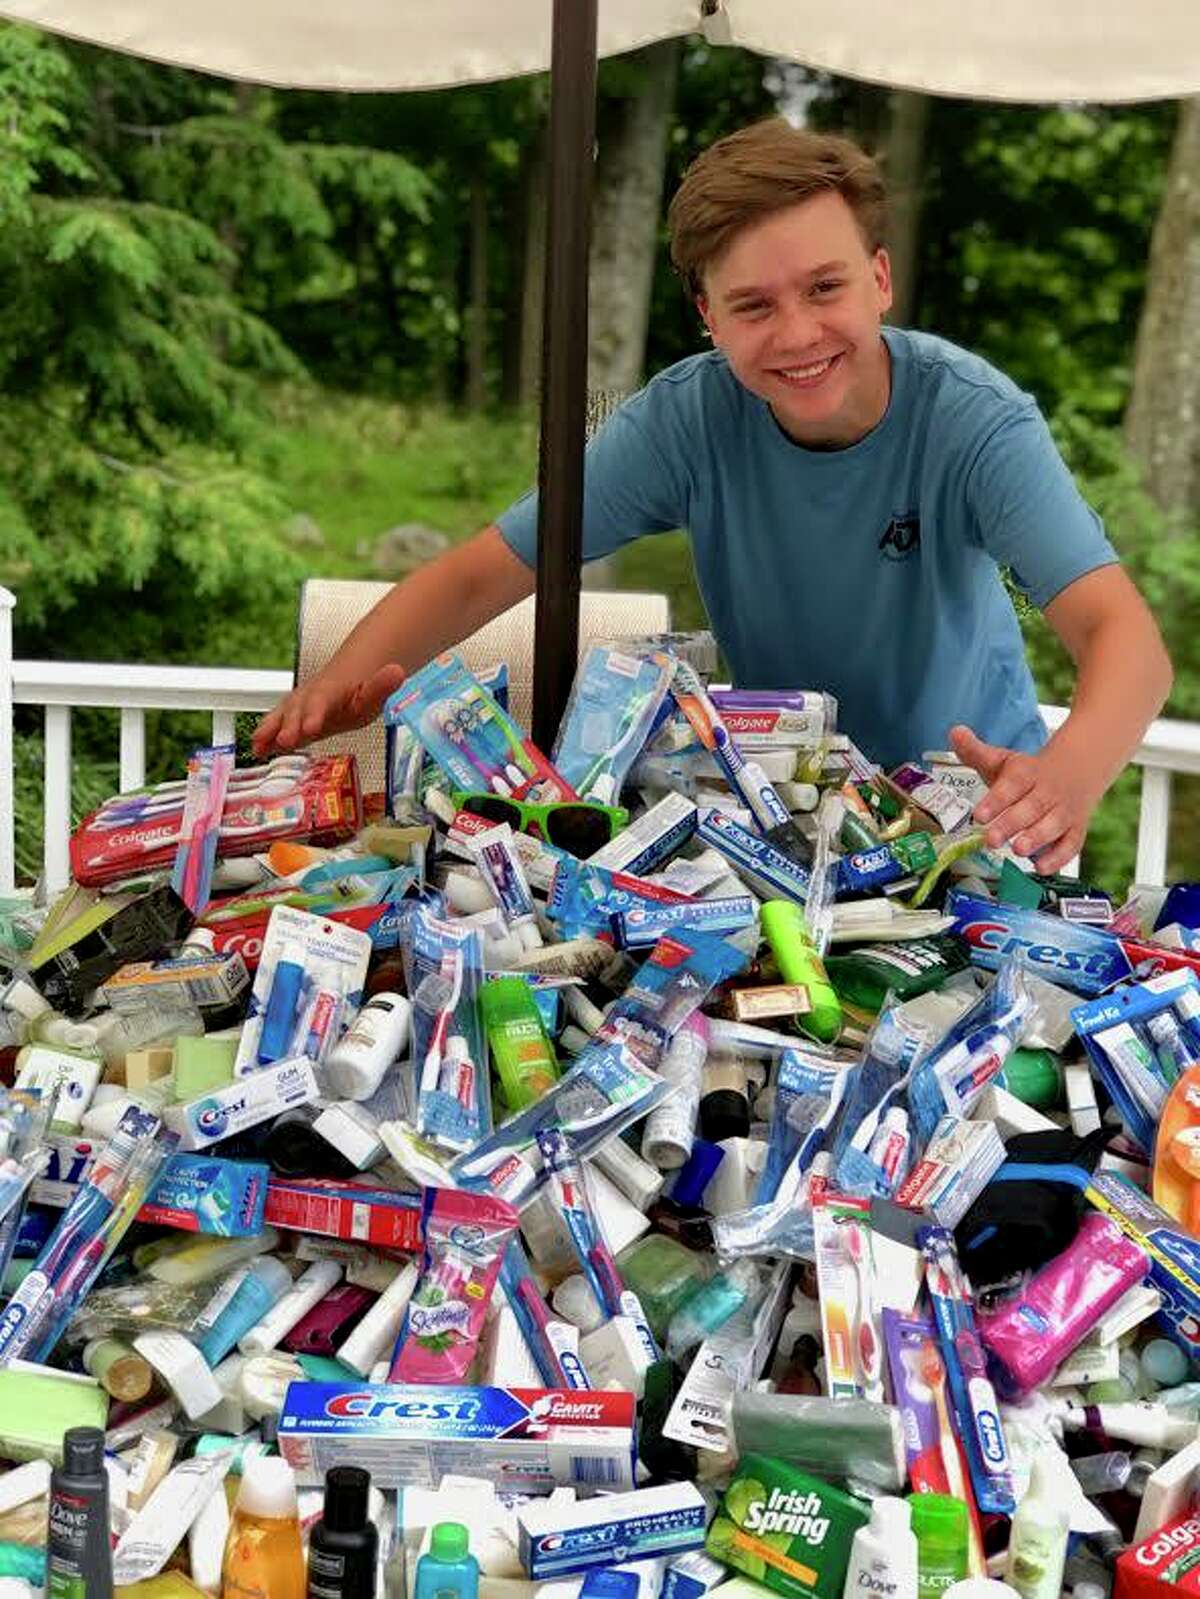 Lukas Dapkus, a rising senior at Ridgefield High School organized a toiletry drive on Saturday, June 27 at St. Mary School to benefit the Dorothy Day Hospitality House in Danbury. Ridgefield residents donated nearly 400 pounds of toiletry supplies, including soap, shampoo, razors and toothpaste. The collected supplies will be donated to the Dorothy Day Hospitality House.